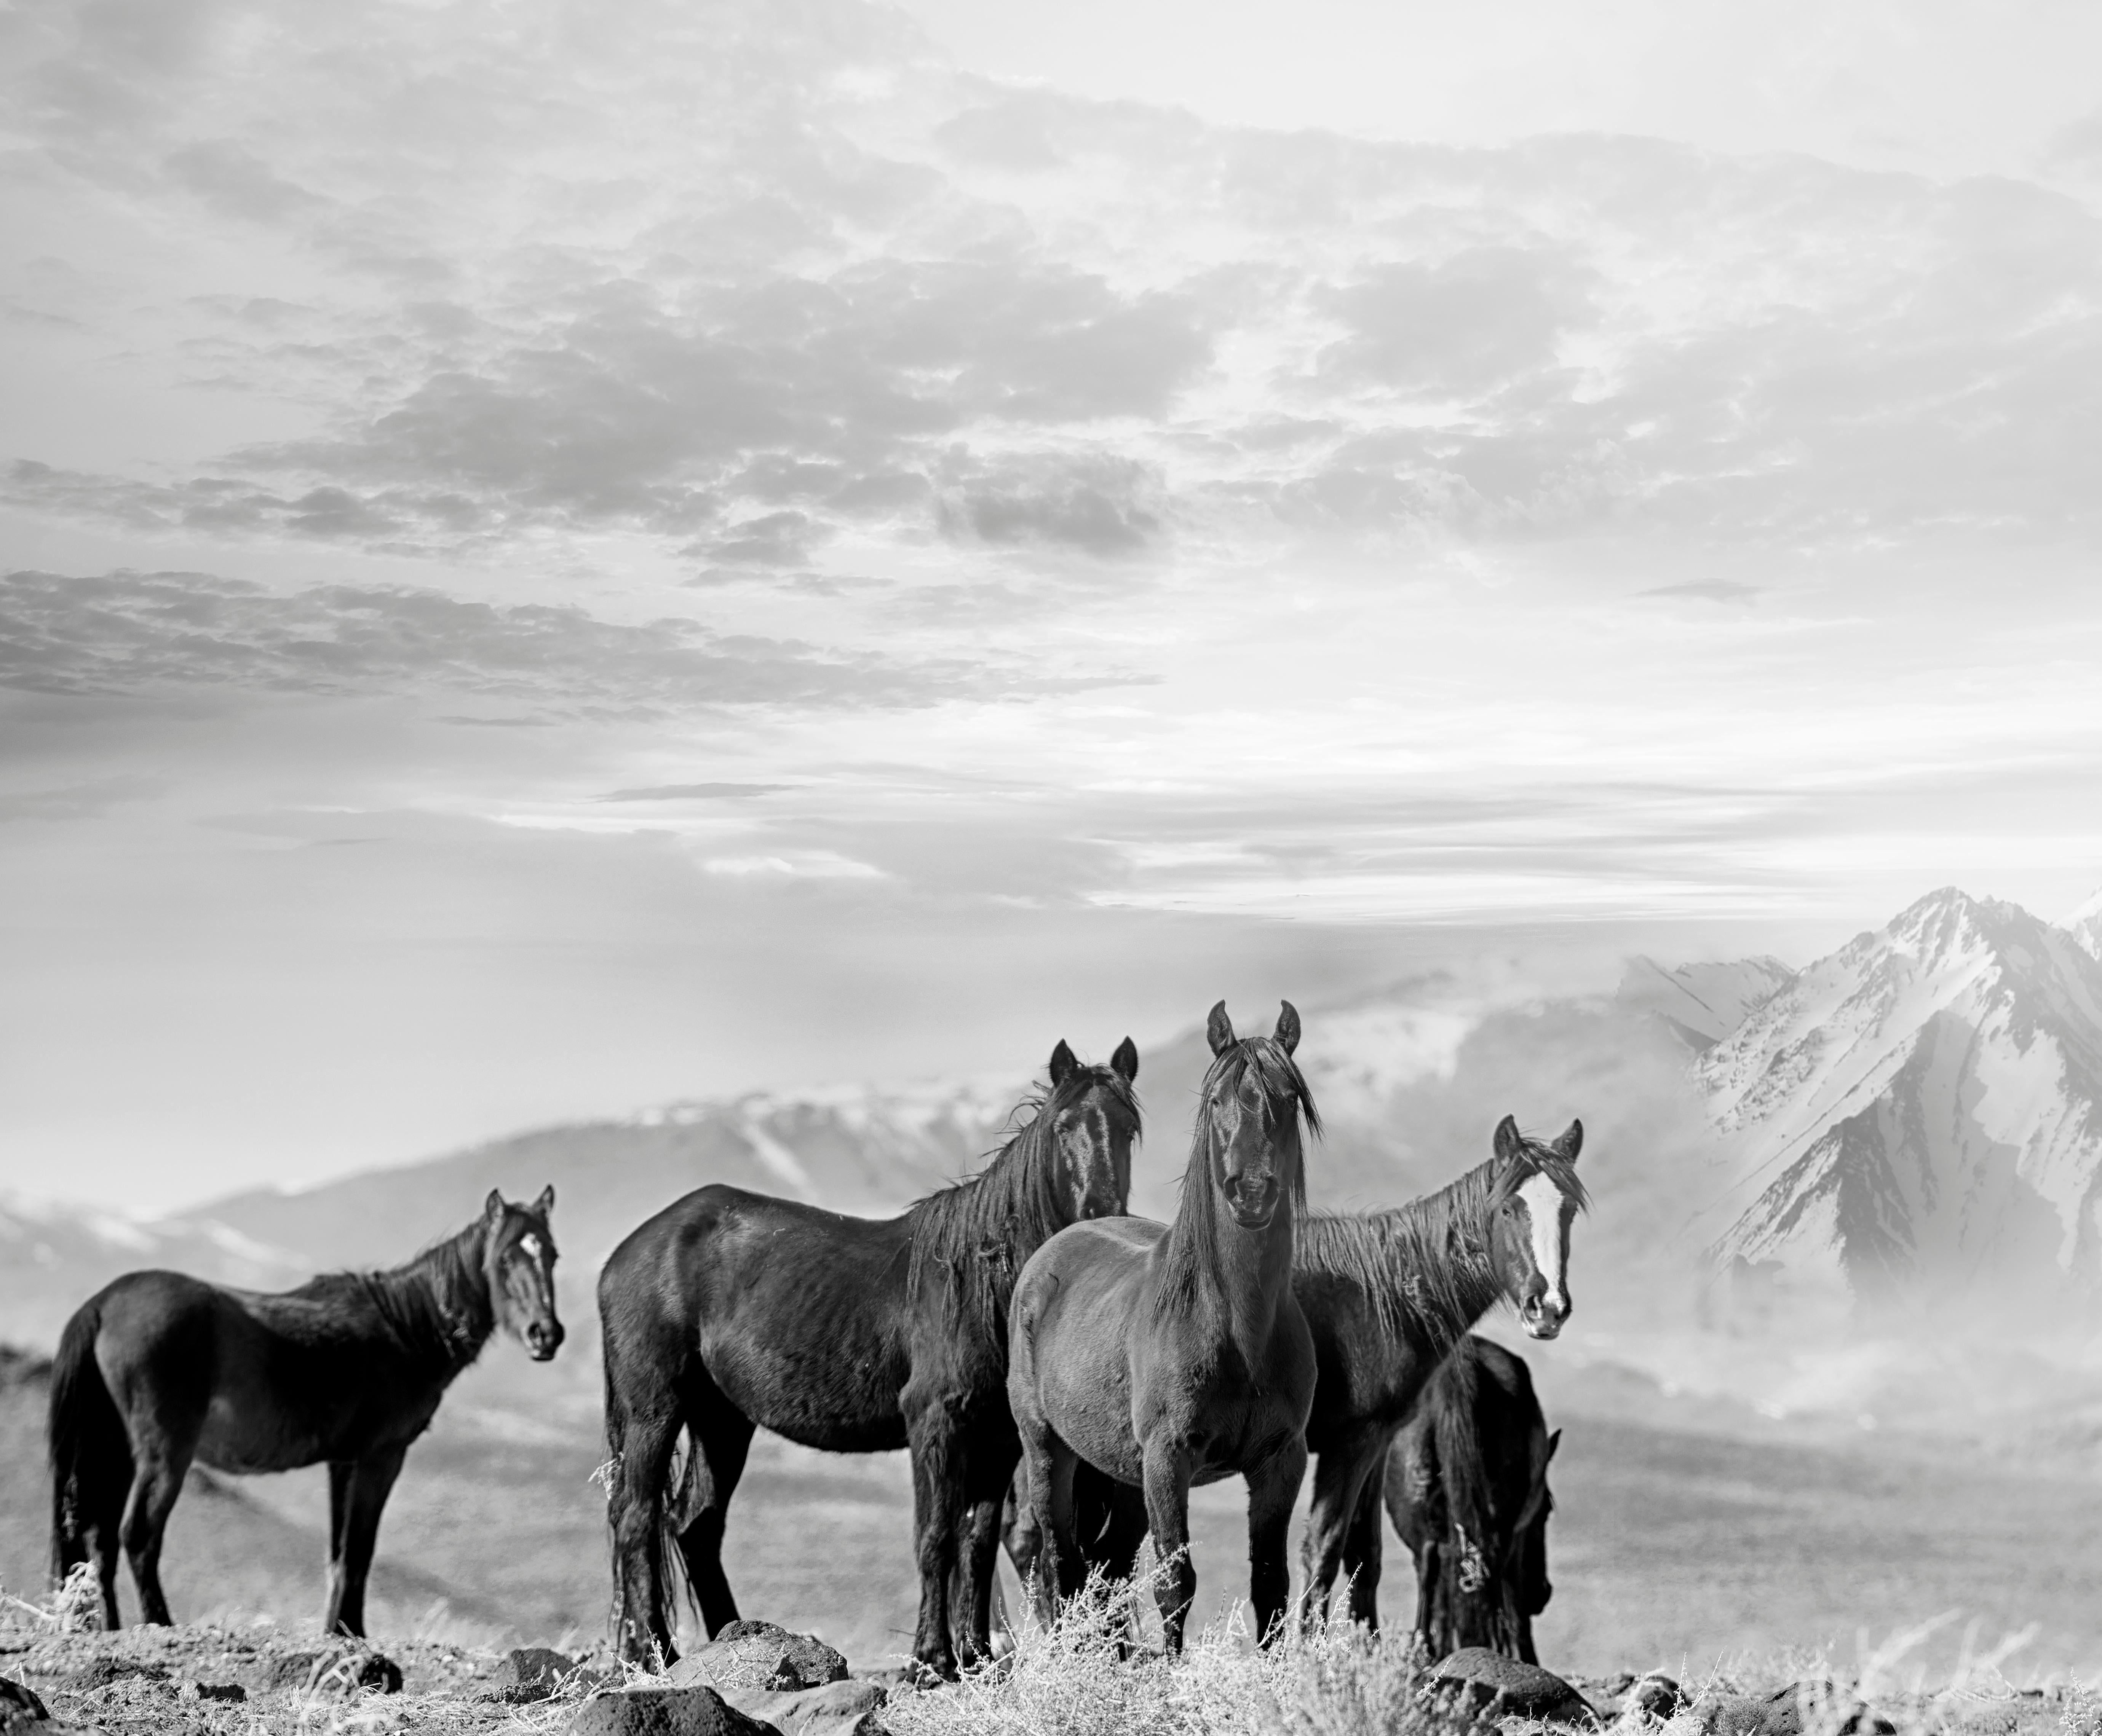 This is a contemporary black and white photograph of Wild Mustangs. 
"They represent the ultimate expression of American freedom"
36x24 Edition of 50. Signed by Shane. 
Framing available. Inquire for rates. 

Shane Russeck has built a reputation for